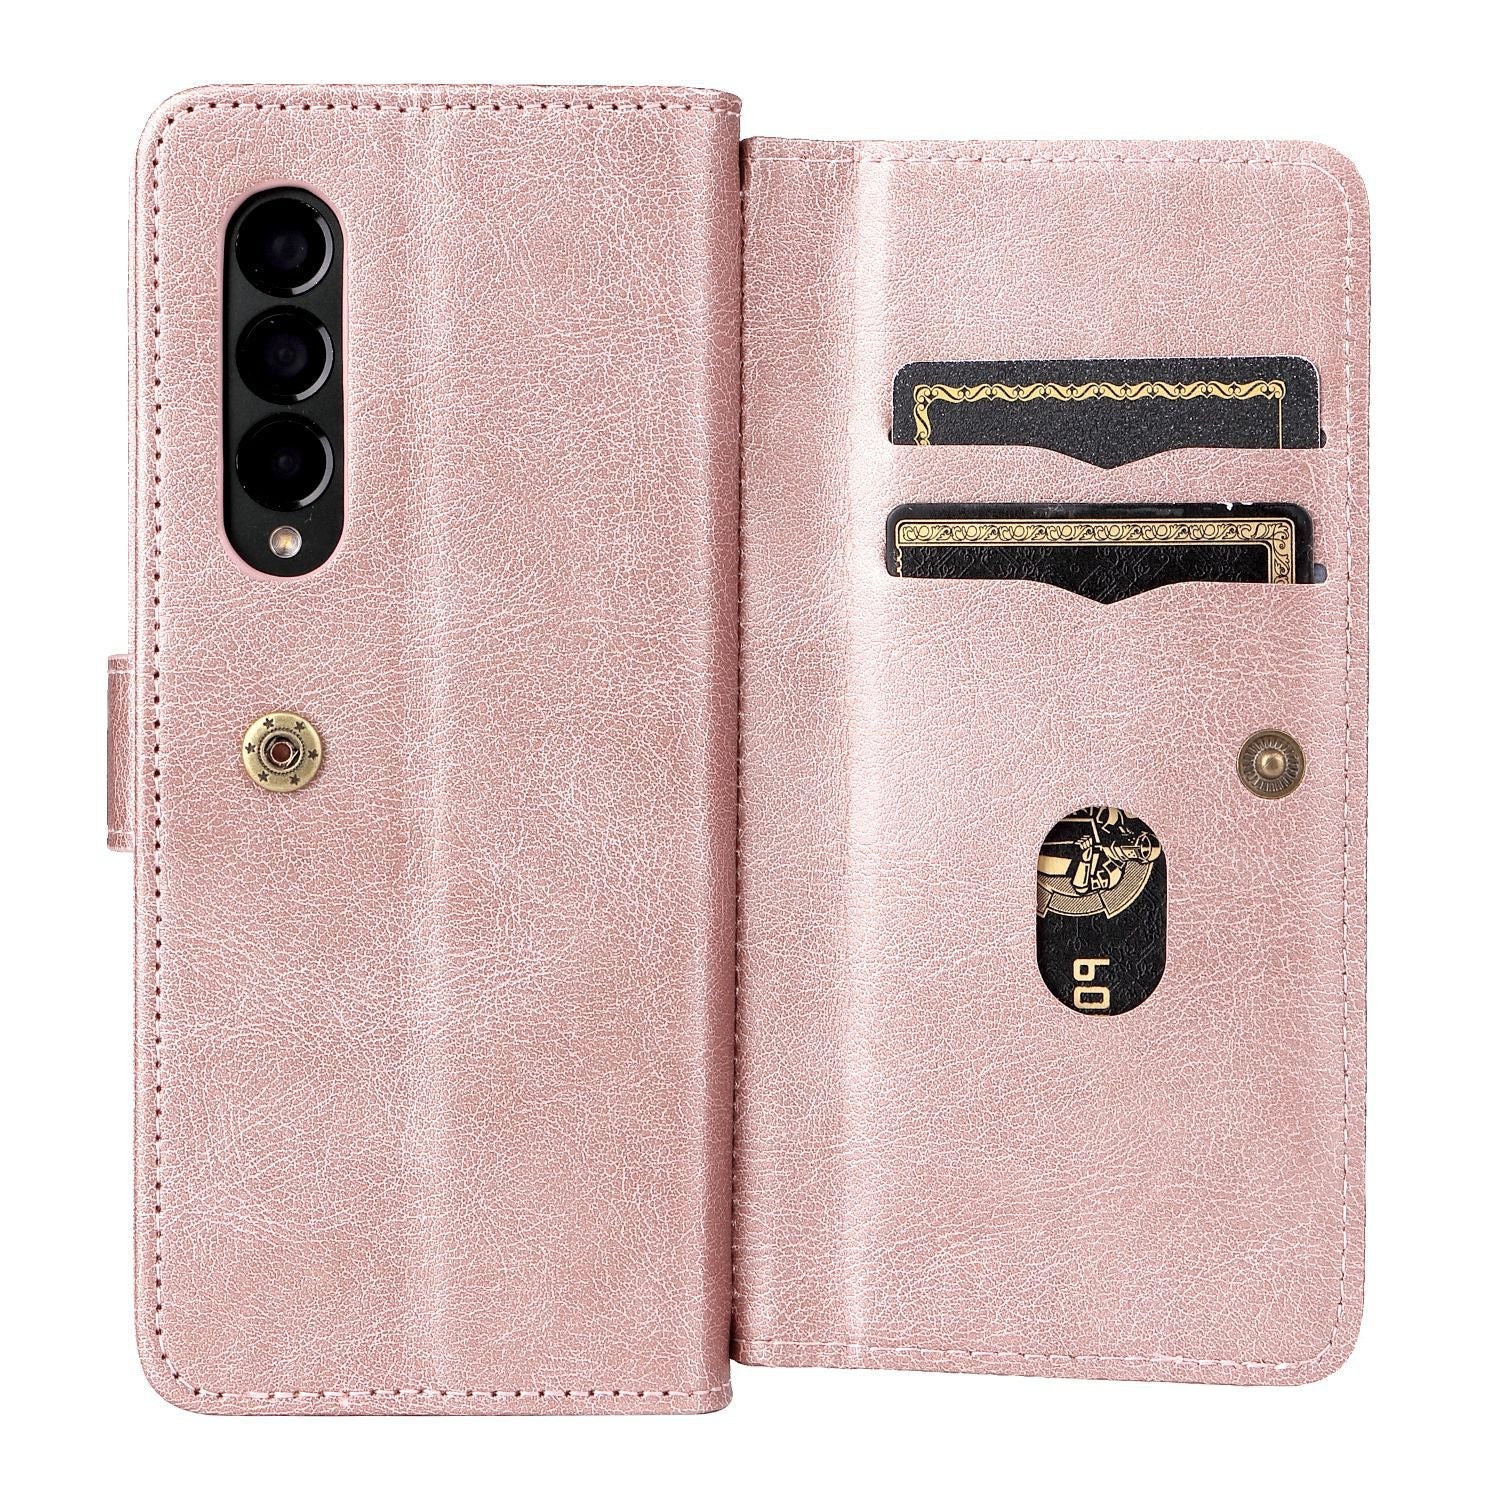 Samsung Galaxy Z Fold 3 Phone Case Wallet with Multi-Card Slots and Kick Stand